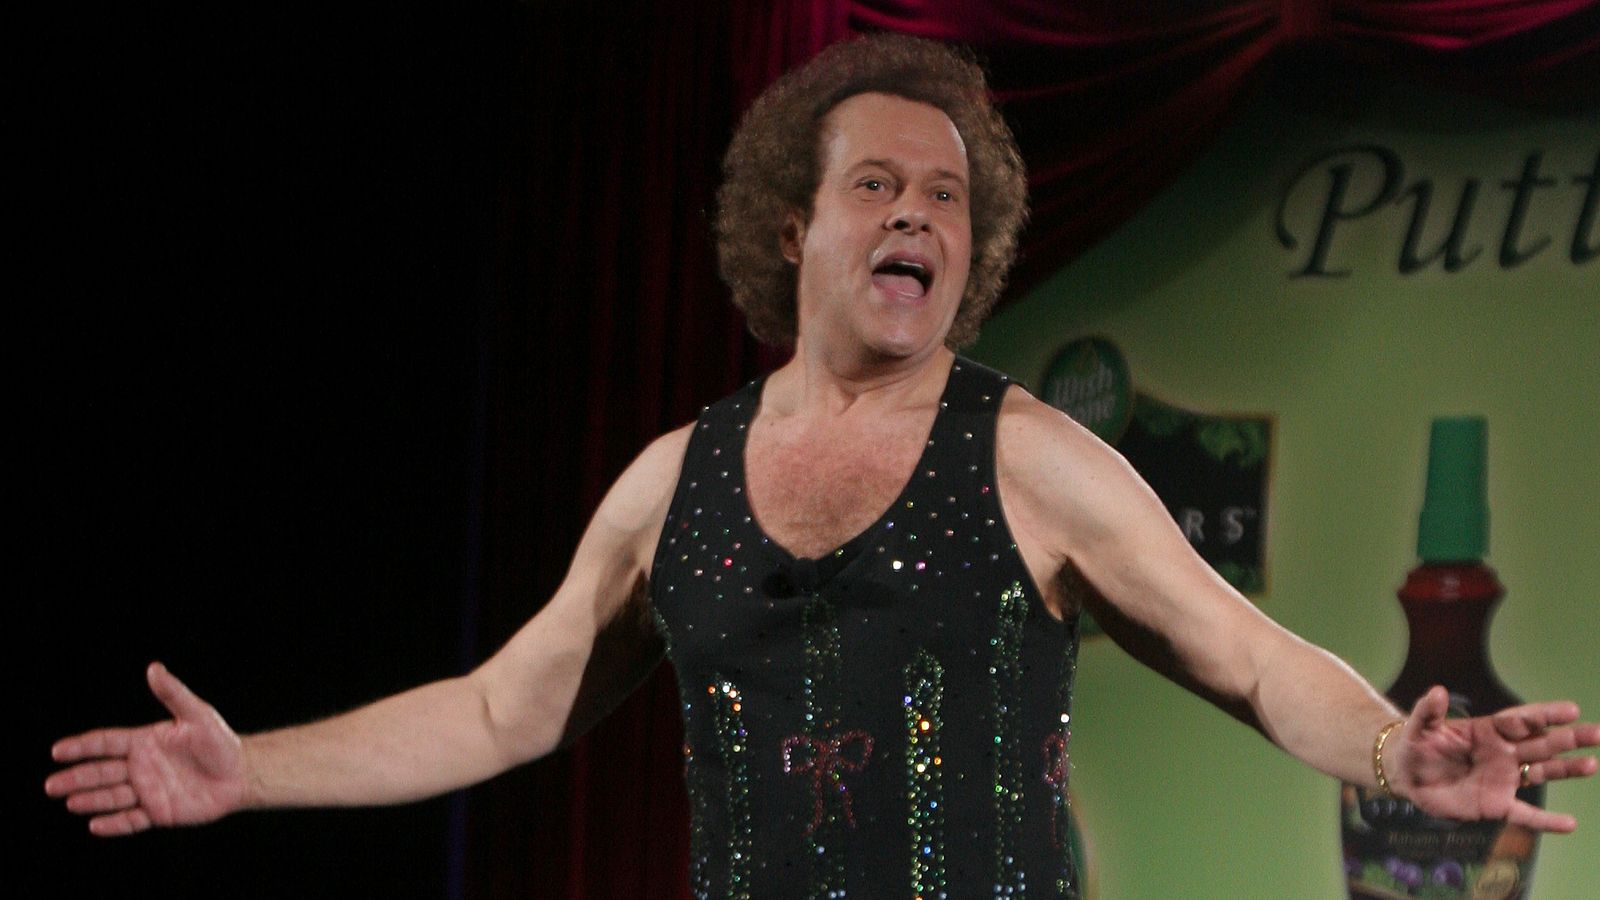 Richard Simmons says he 'never' gave permission for biopic